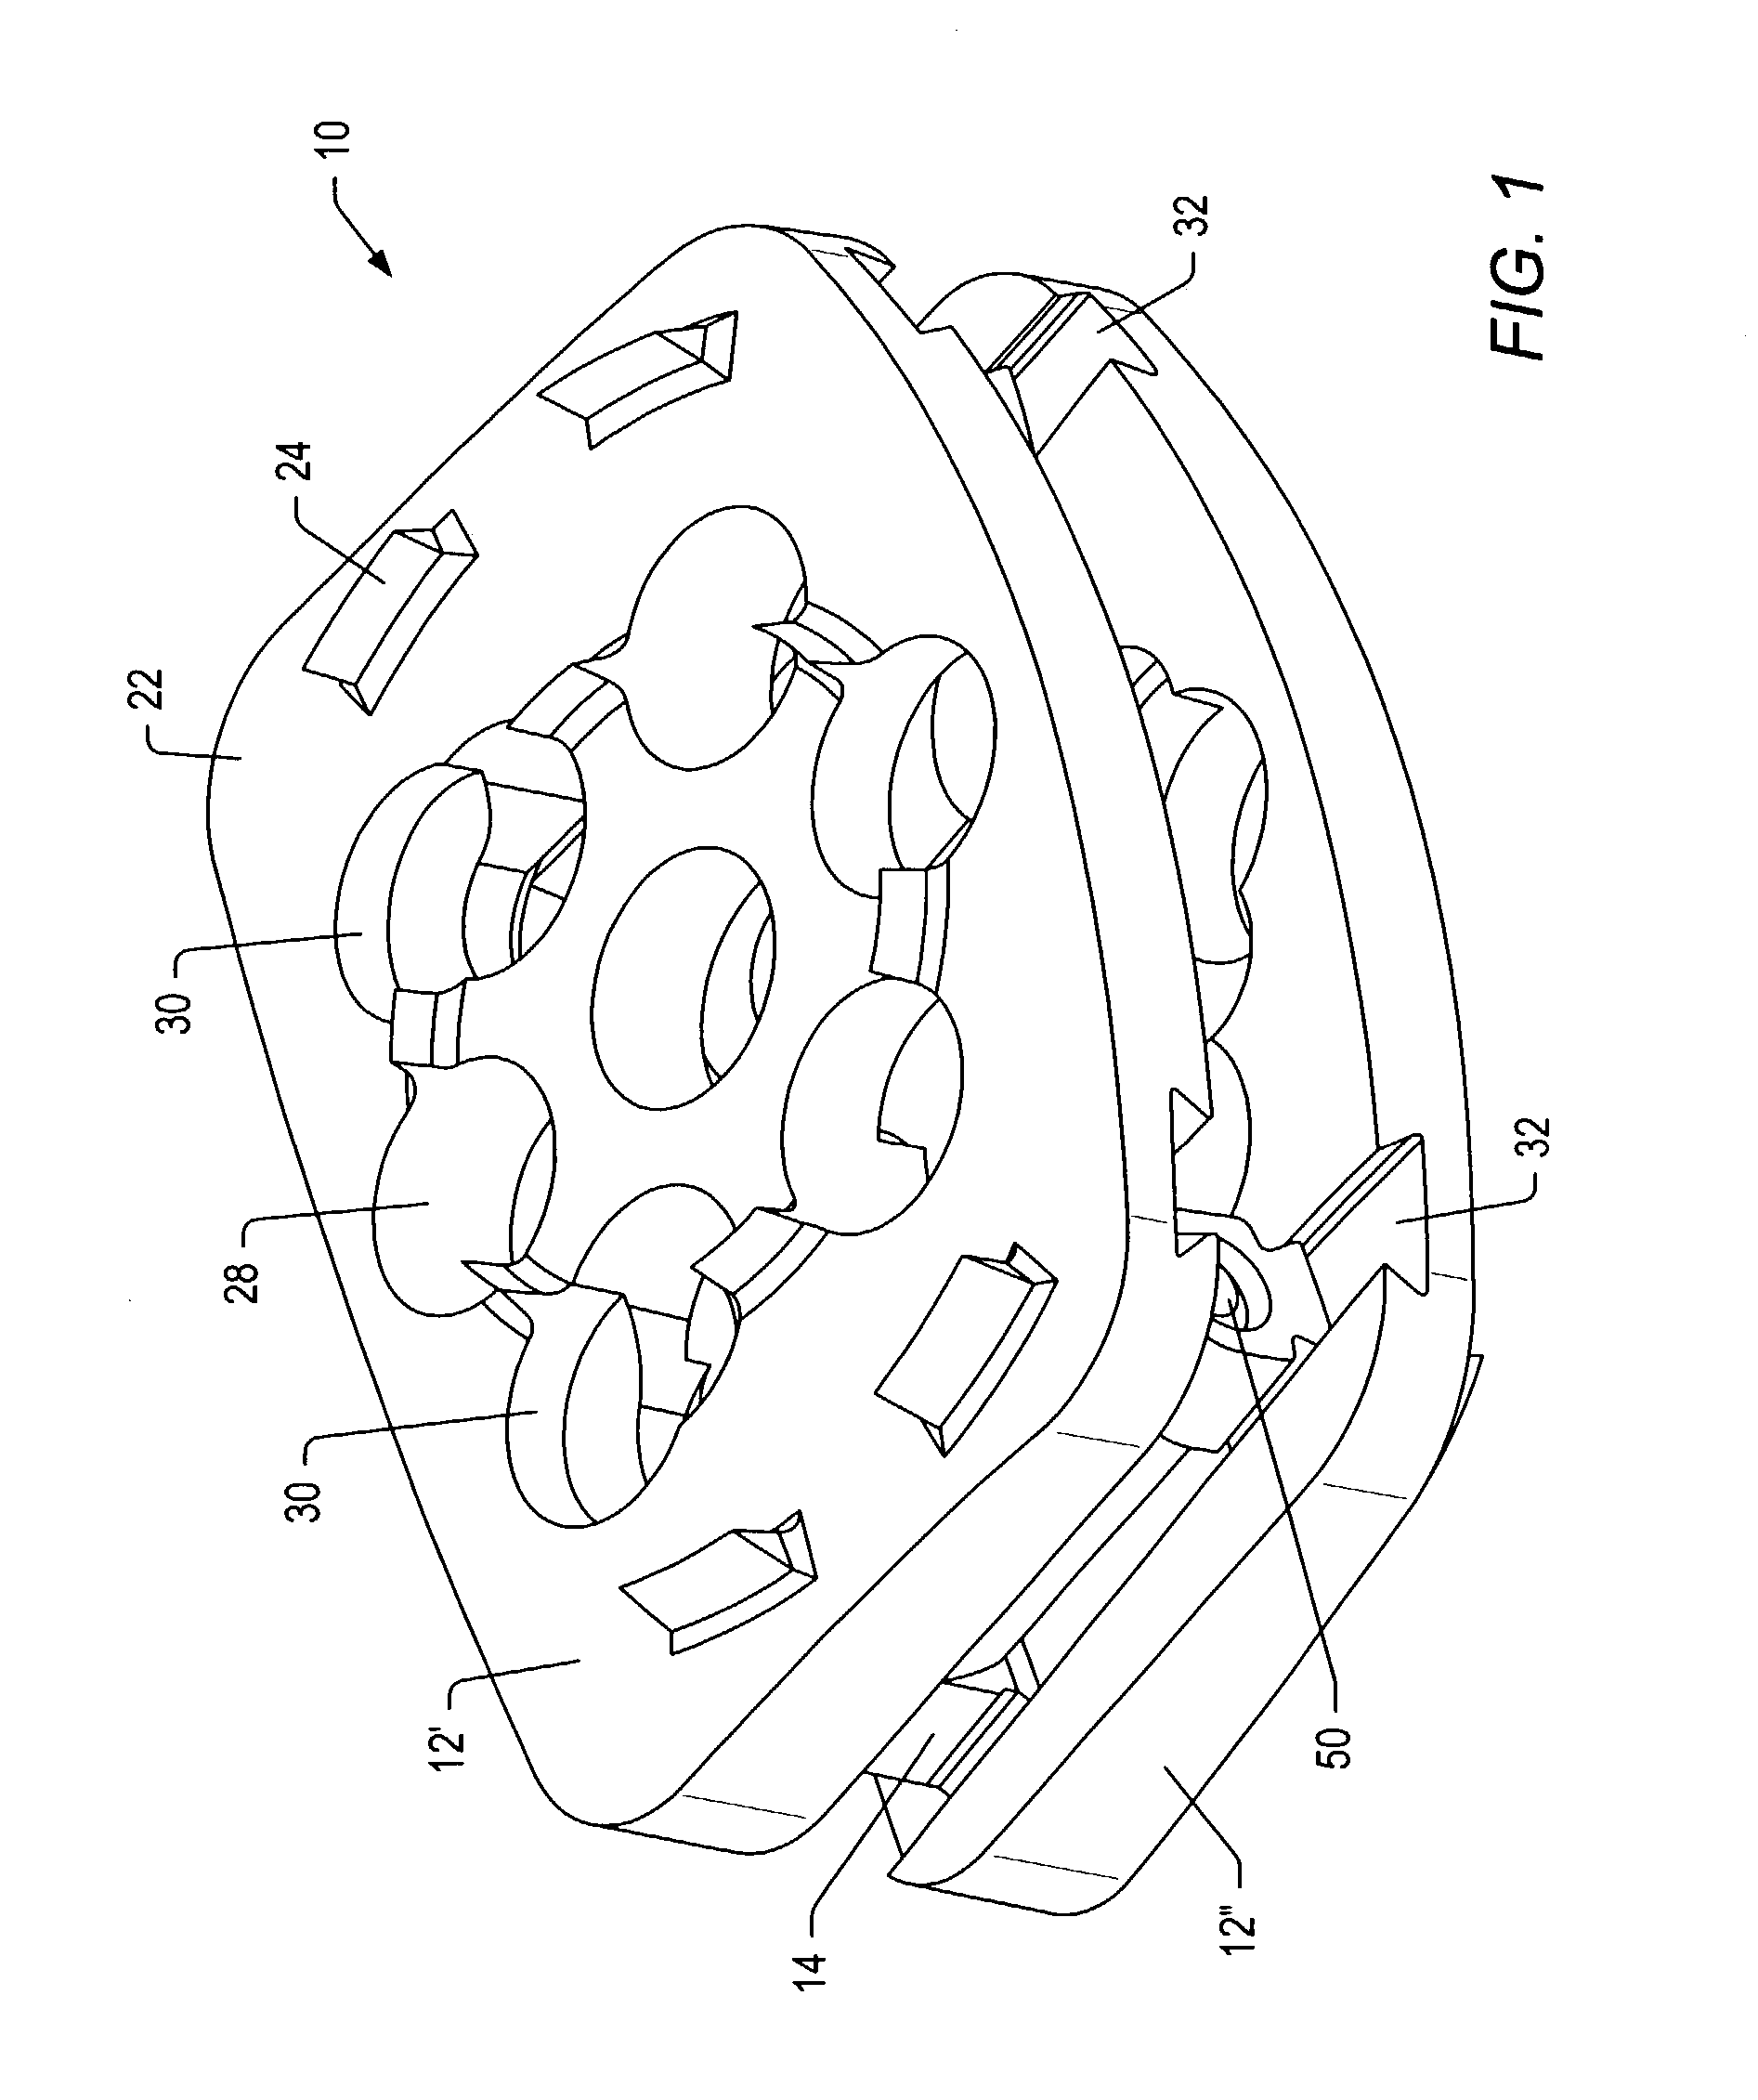 Instrumentation and procedure for implanting spinal implant devices